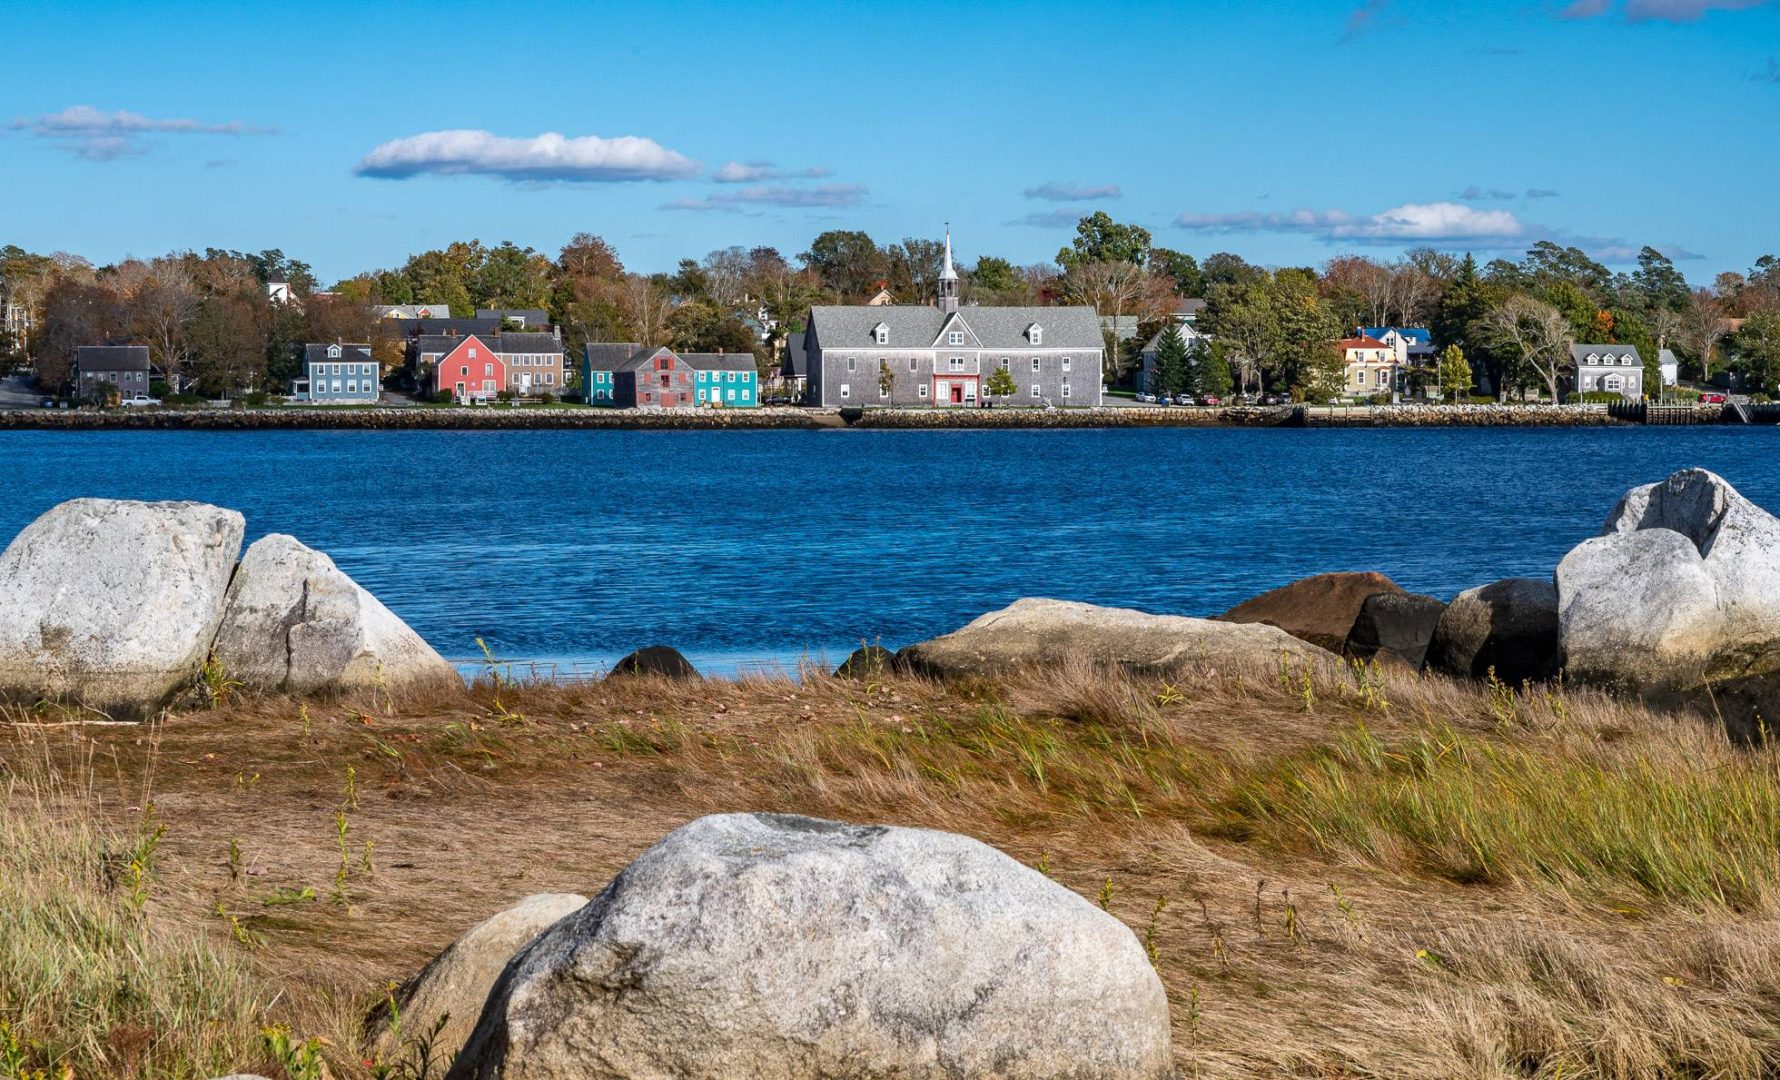 Best Things to Do in Shelburne, Nova Scotia